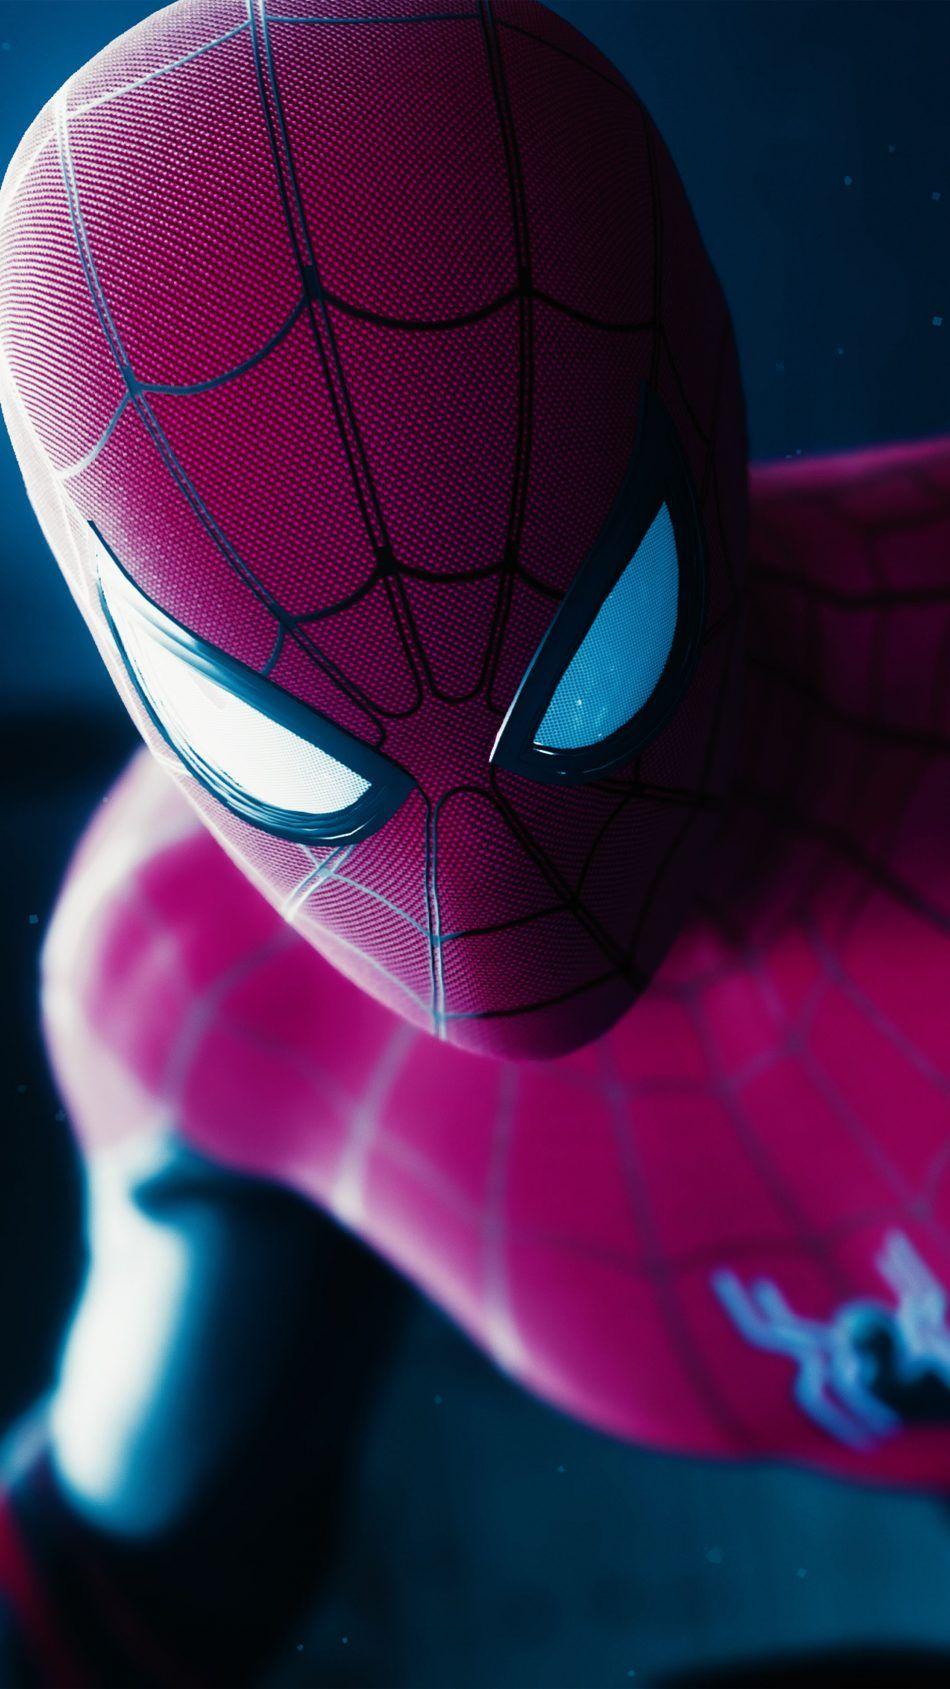 Spider Man Far From Home PS4 2019 4K Ultra HD Mobile Wallpaper. Spiderman, Marvel Superhero Posters, Spiderman Picture